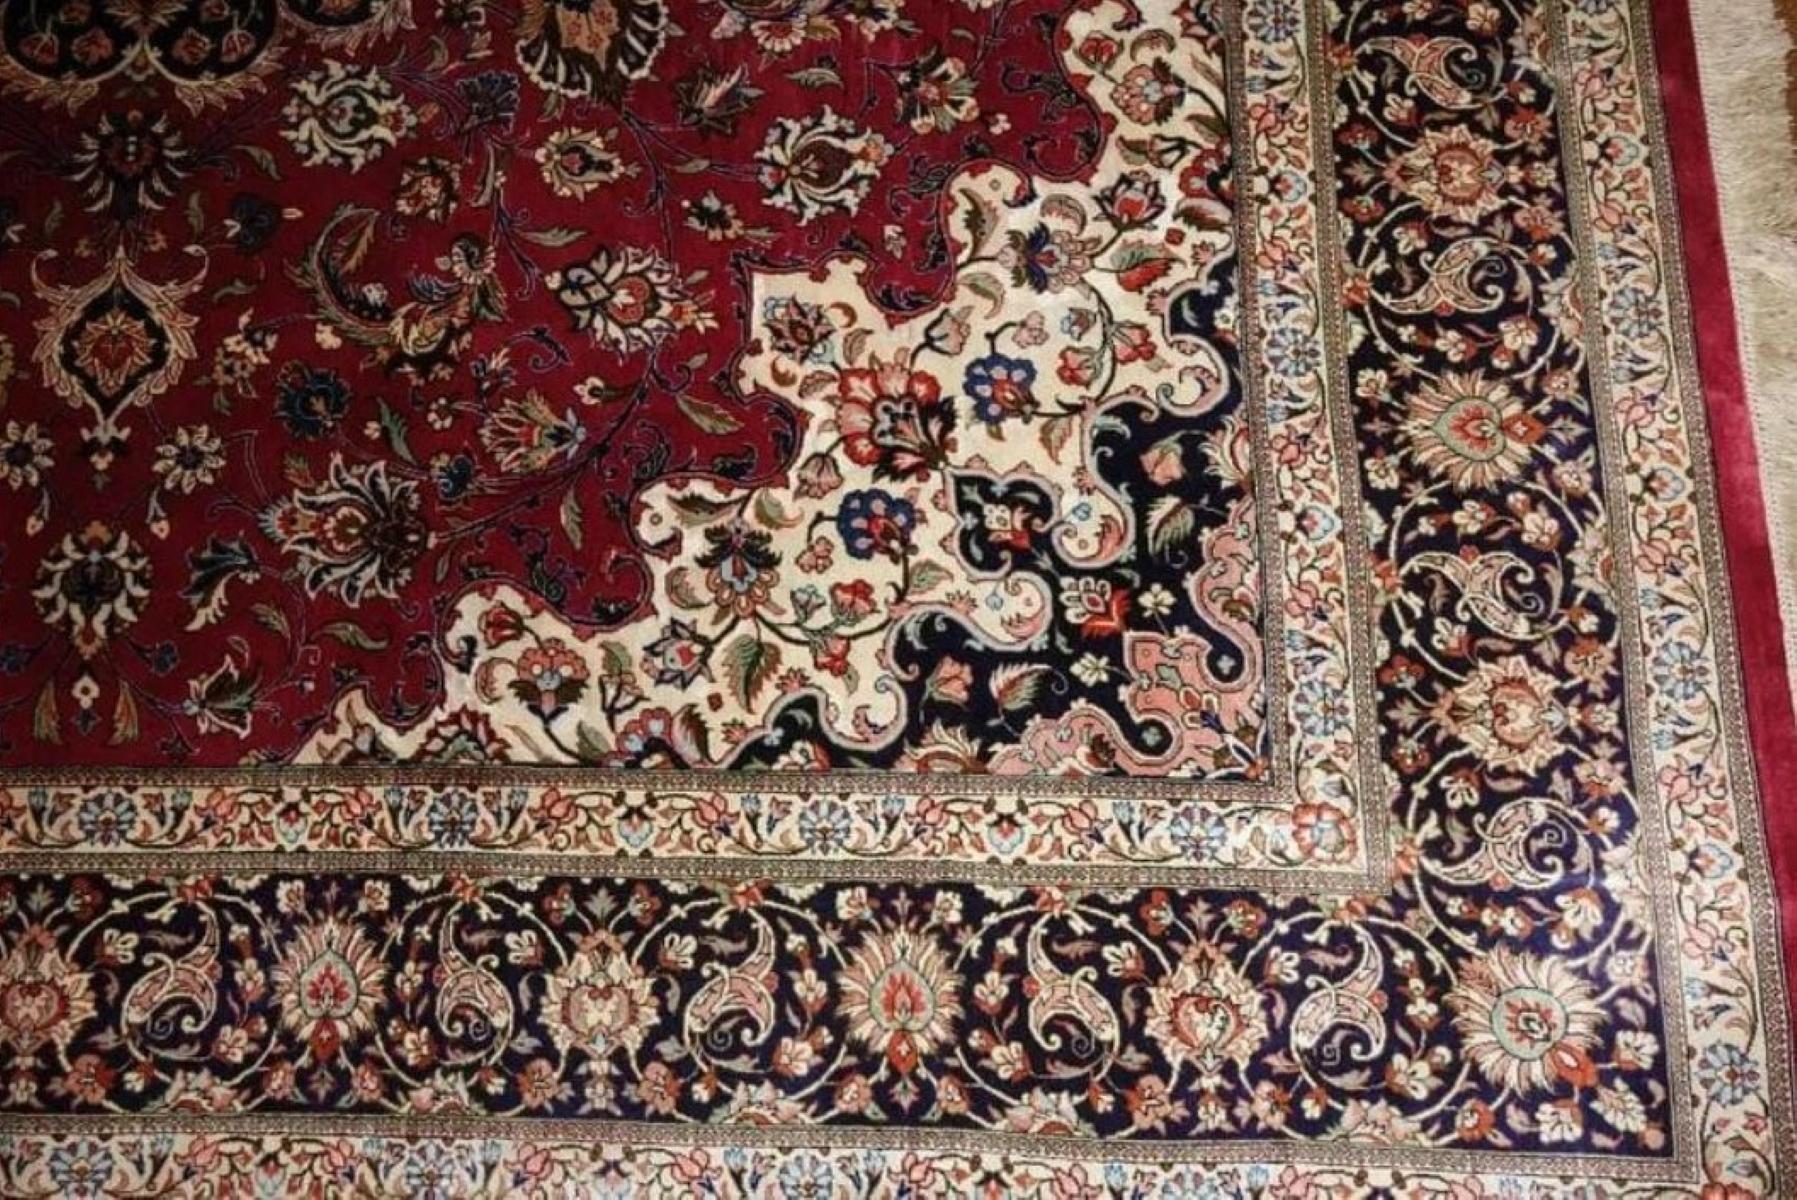 Very fine Persian Rug Qum 700 Knots per inch, Size 6.6 x 6.6 Iran Qum Ziaee Silk and Silk foundation. Around 4,000,000 knots tied by hand one by one. It takes 3 years to complete this piece of art.